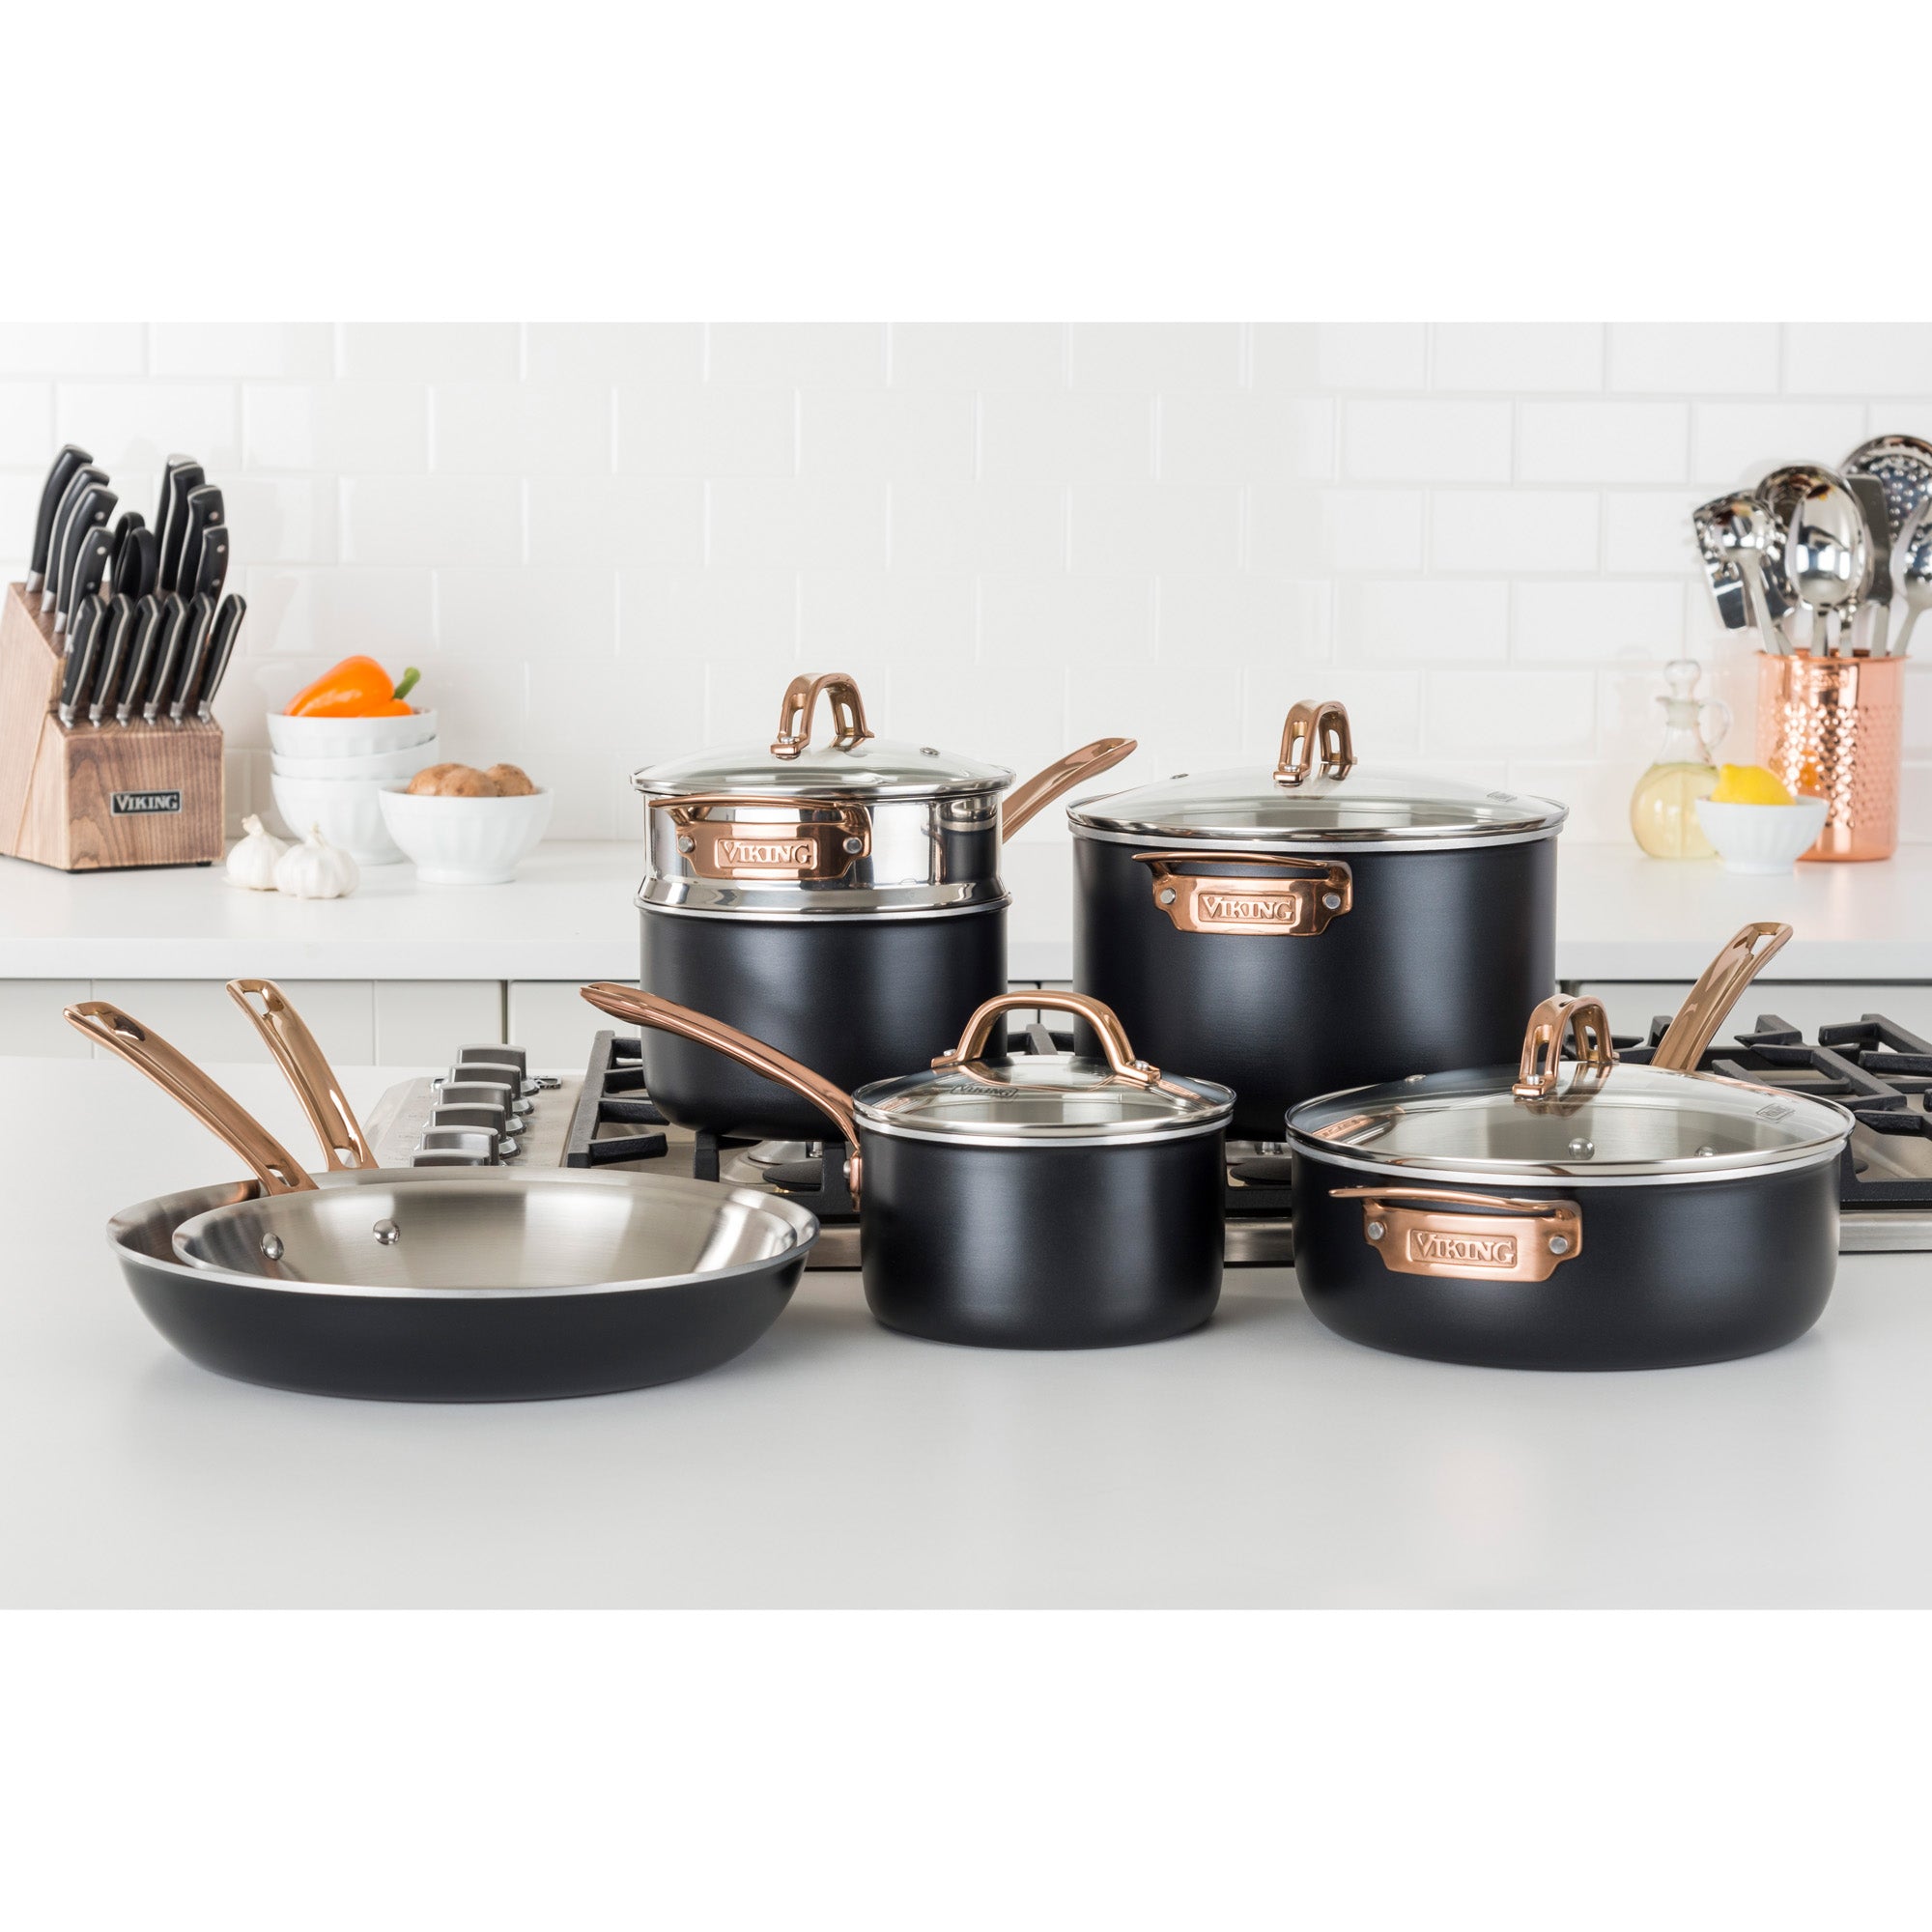 Viking 3-Ply 10-Piece Black and Copper Cookware Set with Glass